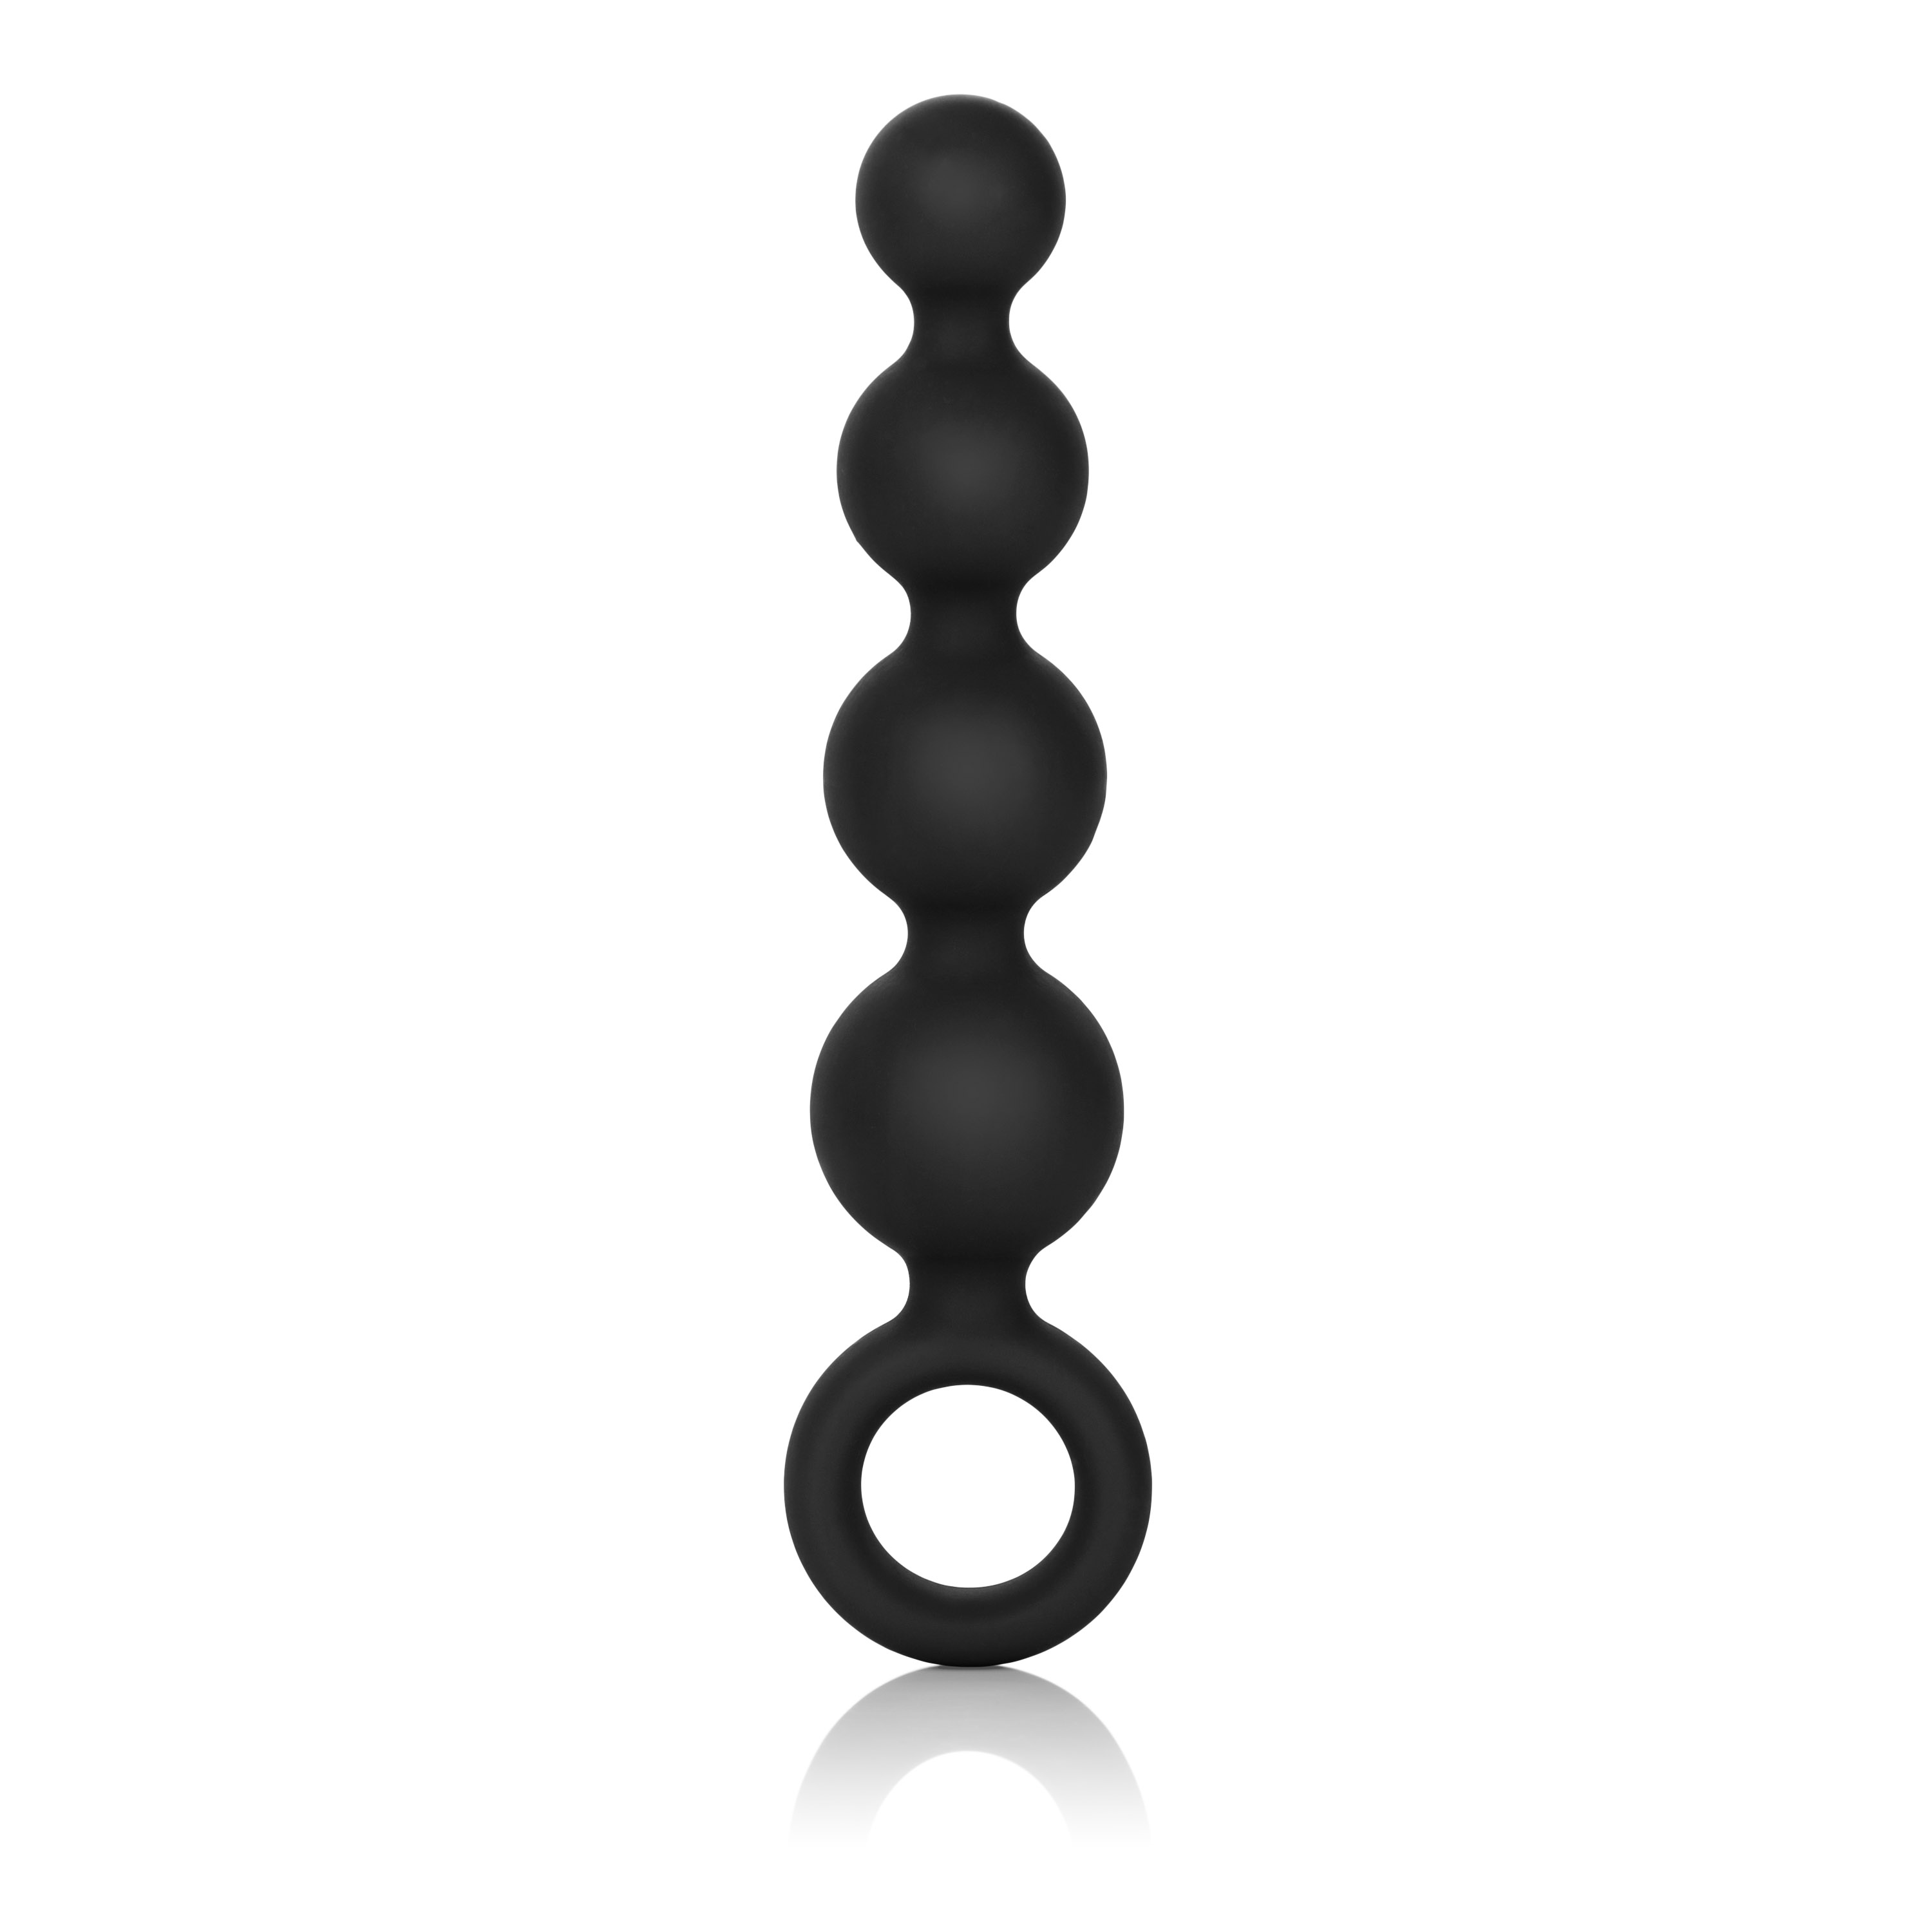 silicone booty beads black 